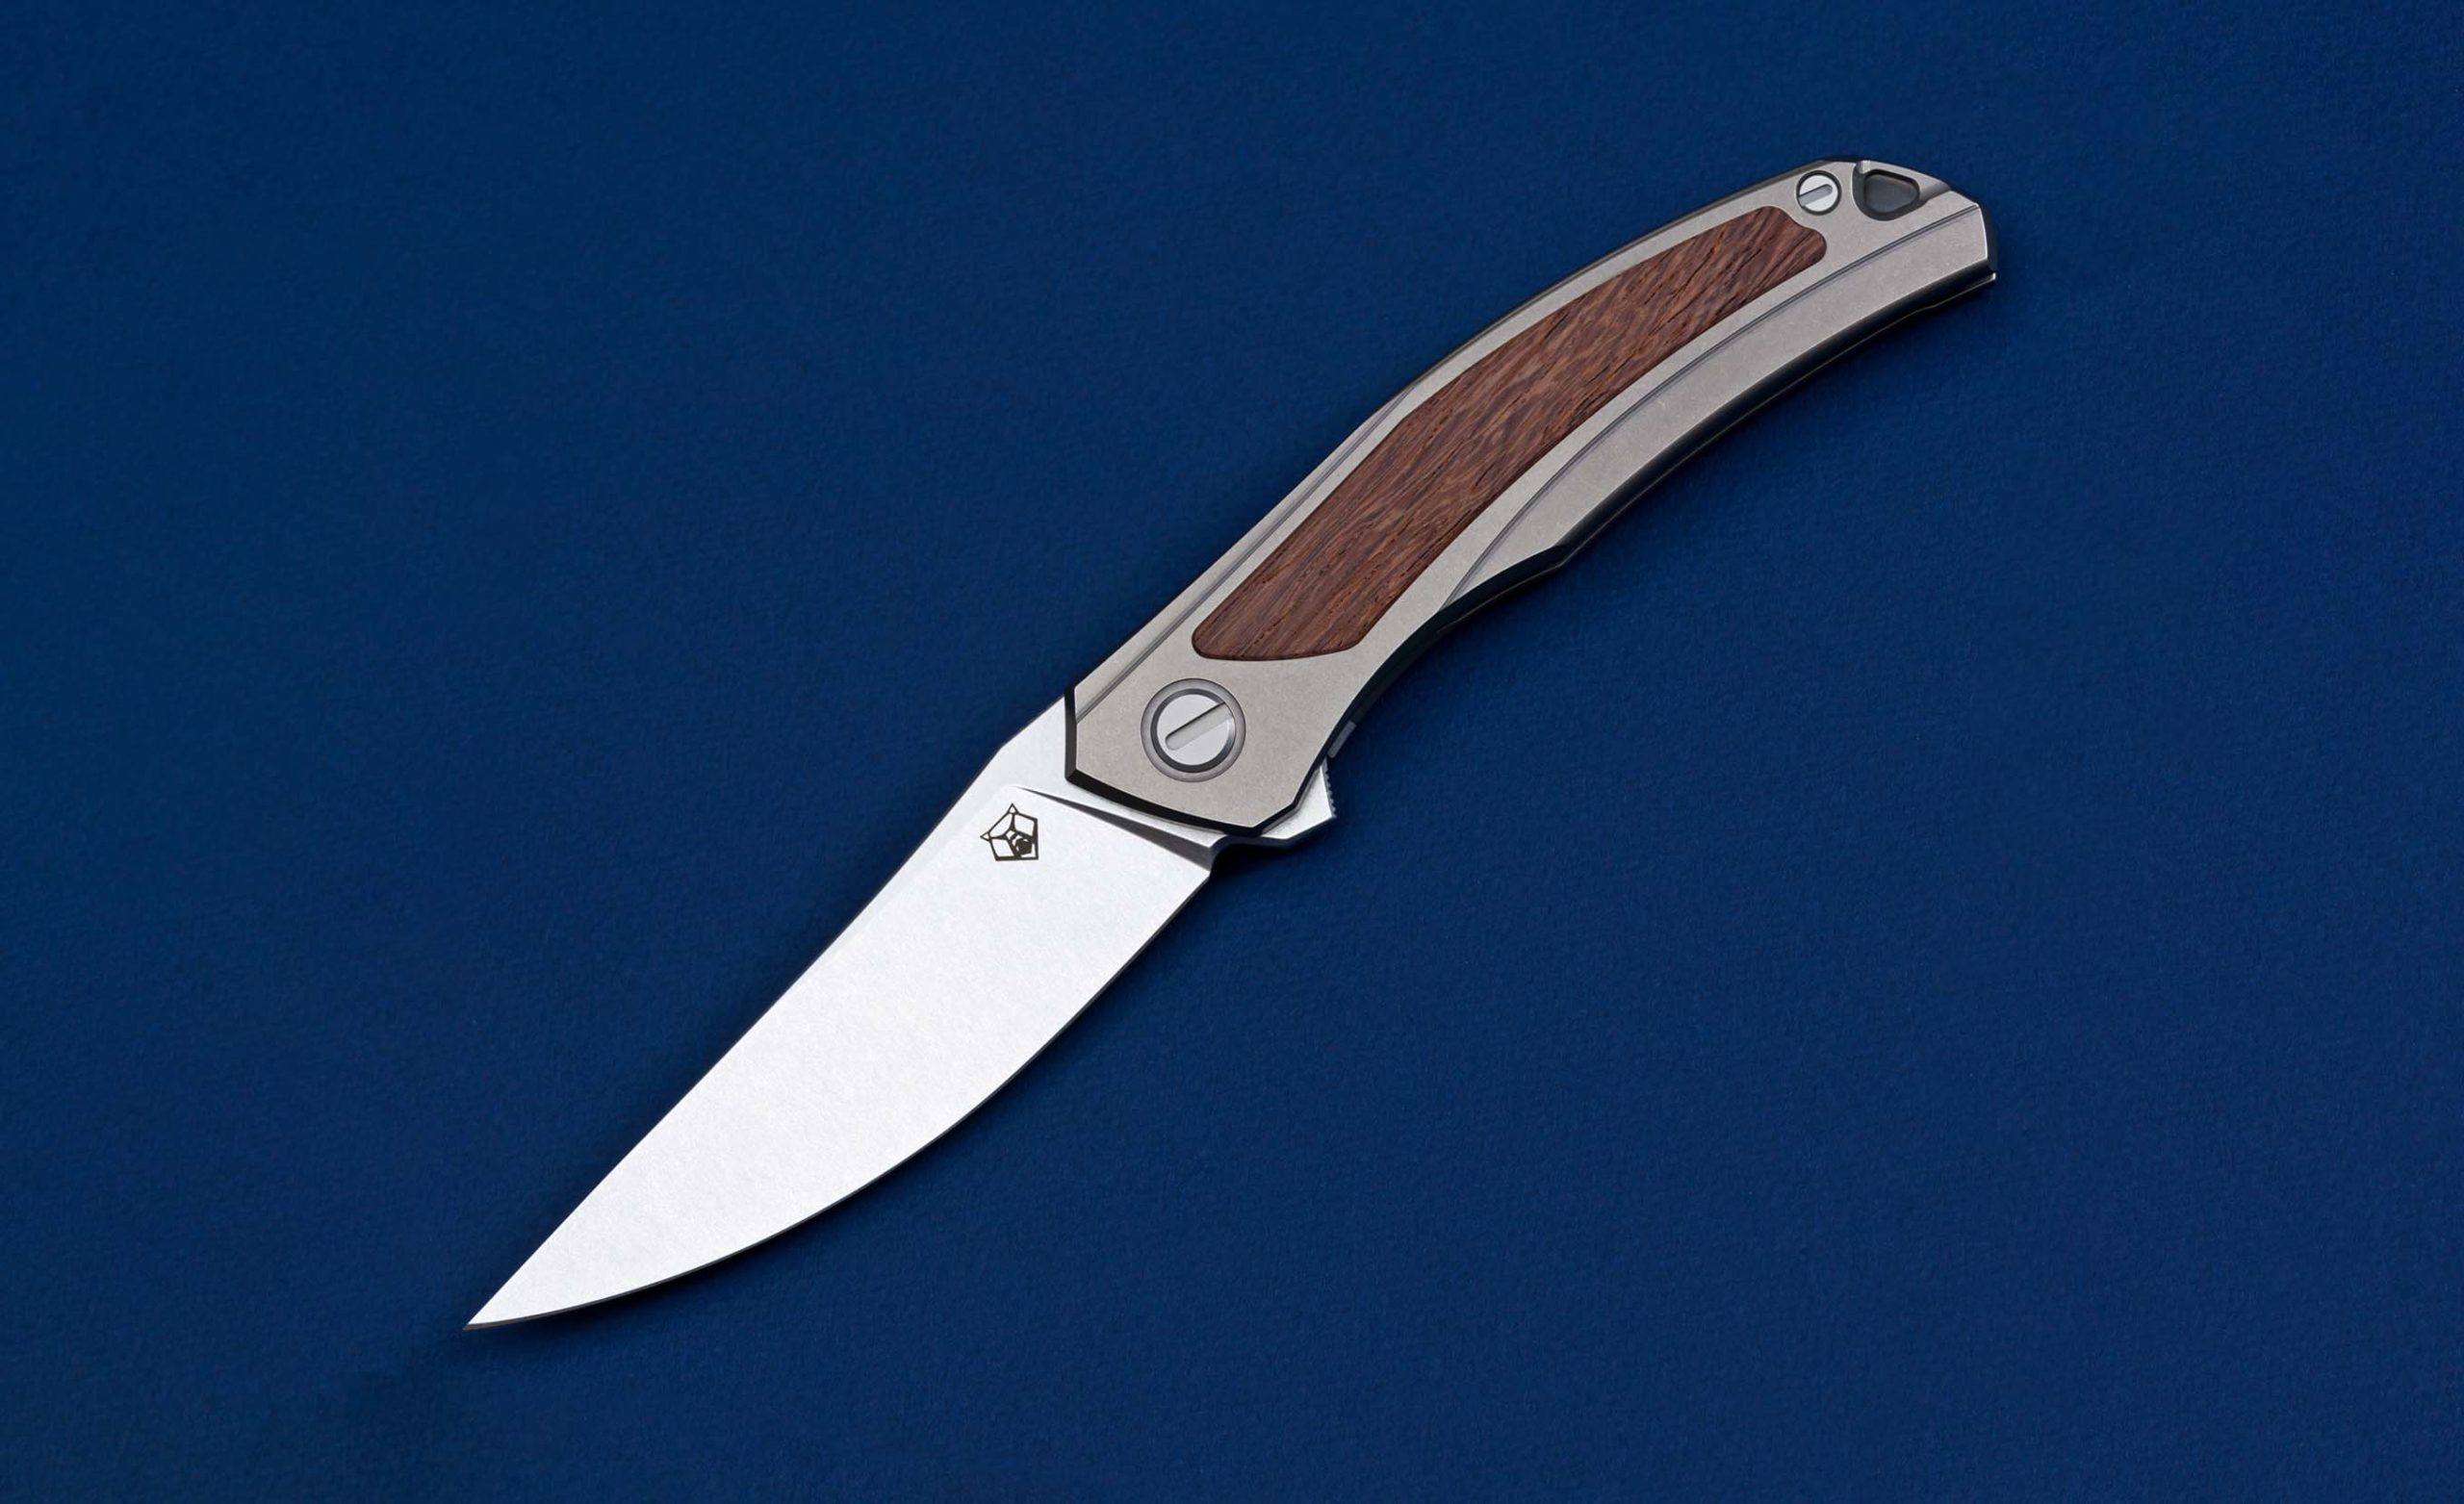 Shirogorov’s Latest Serial Release is the Stripped Back Quantum Ursus NL